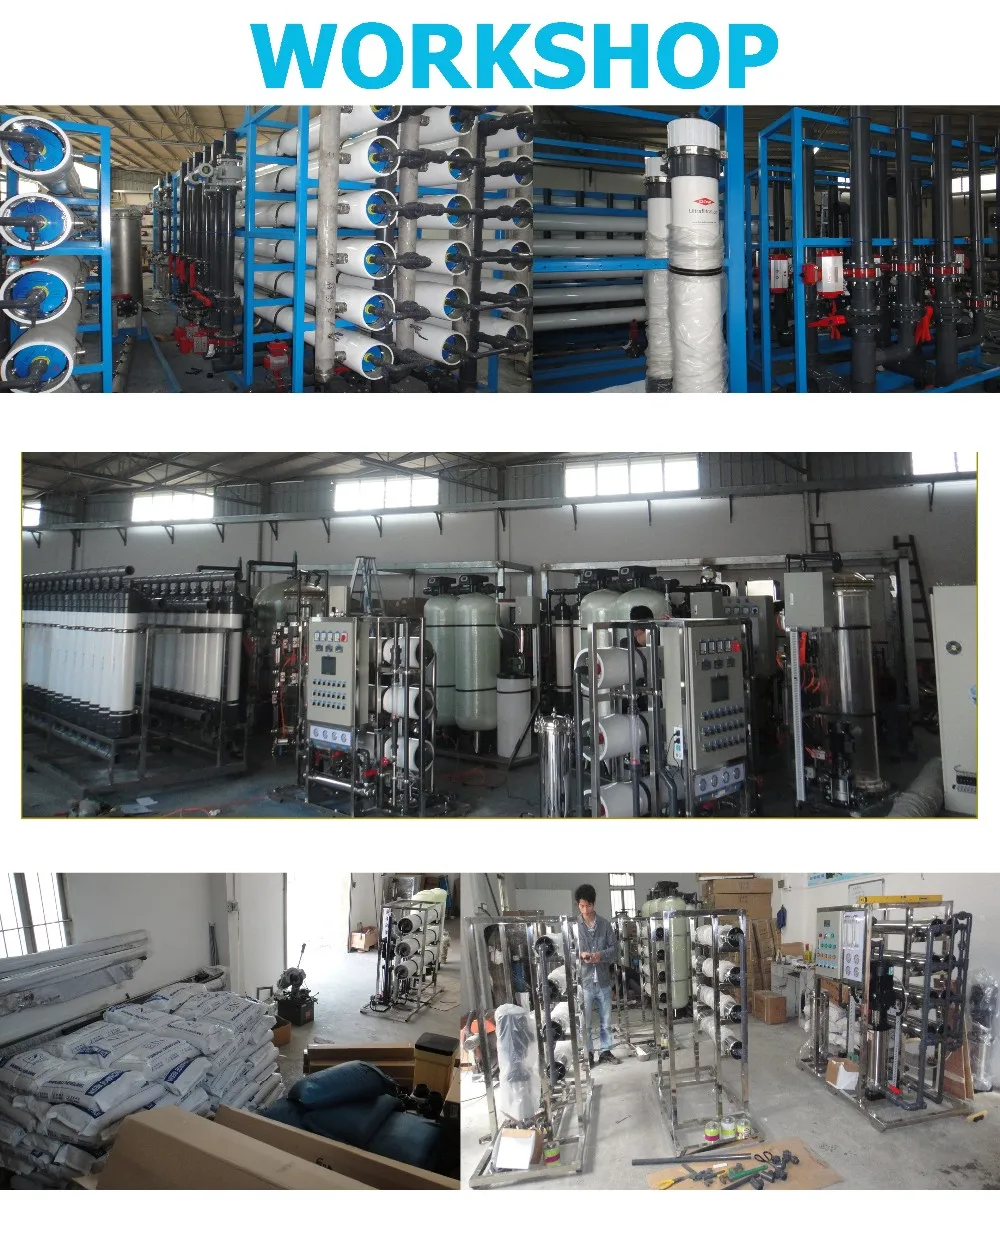 1T Pretreatment waste water treatment equipment industrial water purification systems